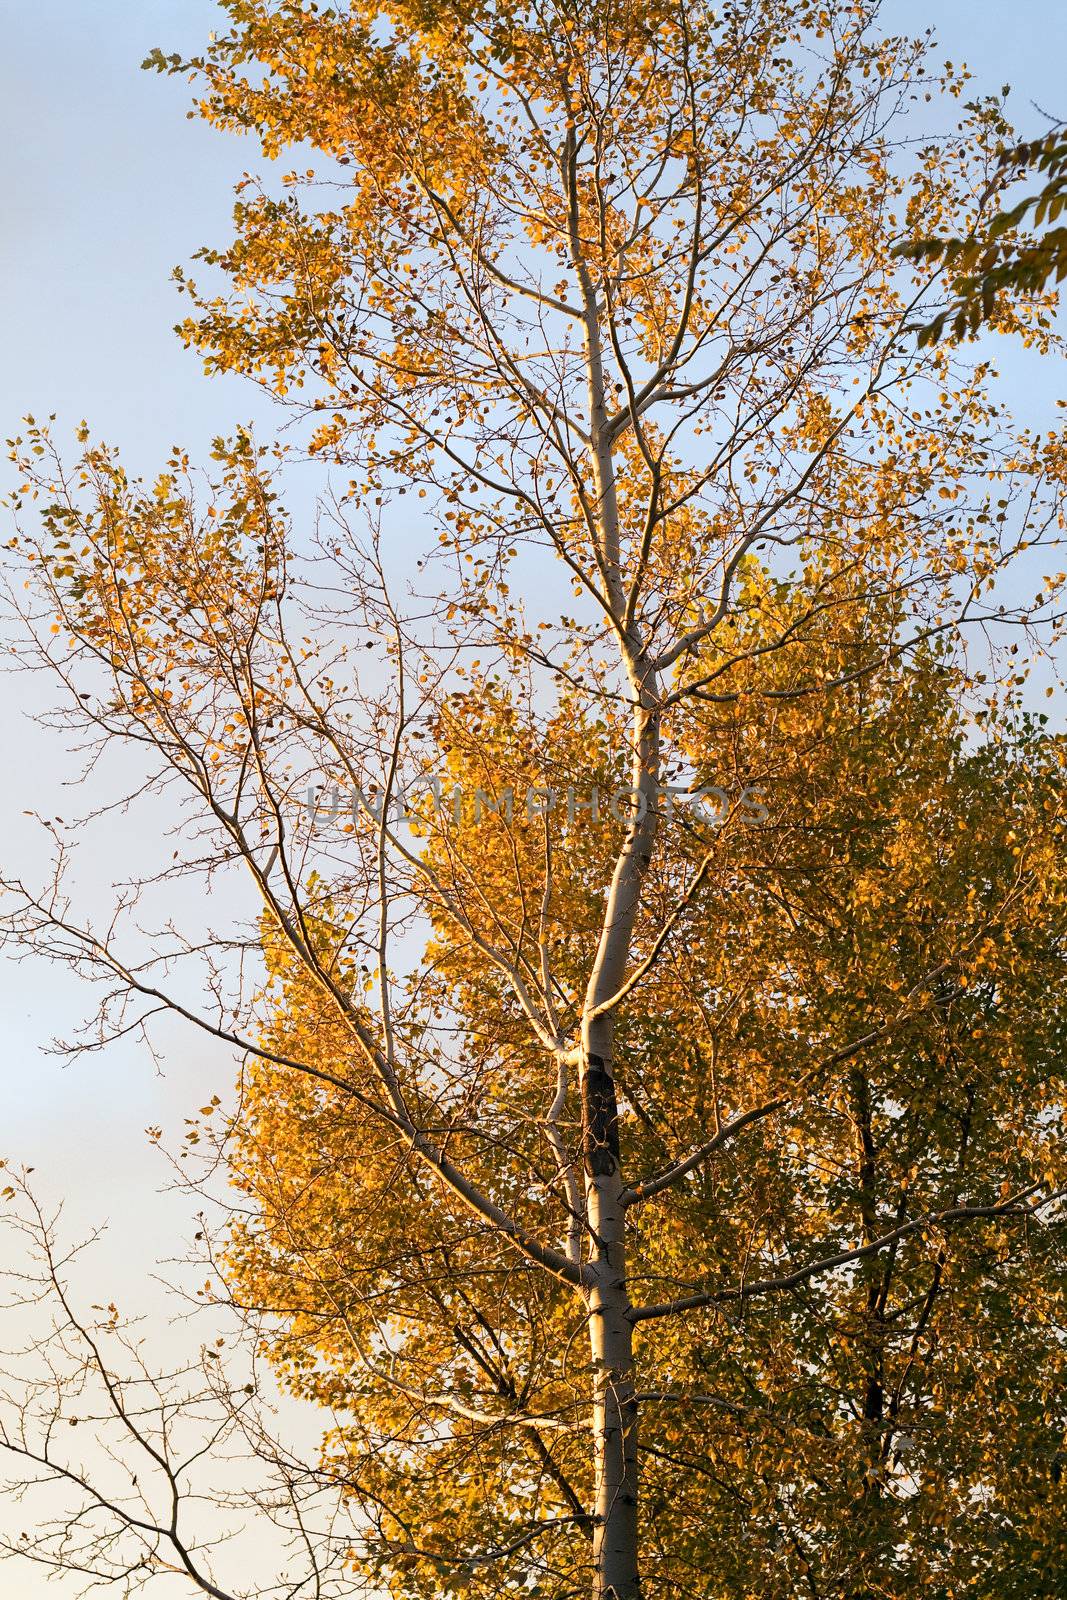 Autumn tree with the turned yellow leaves